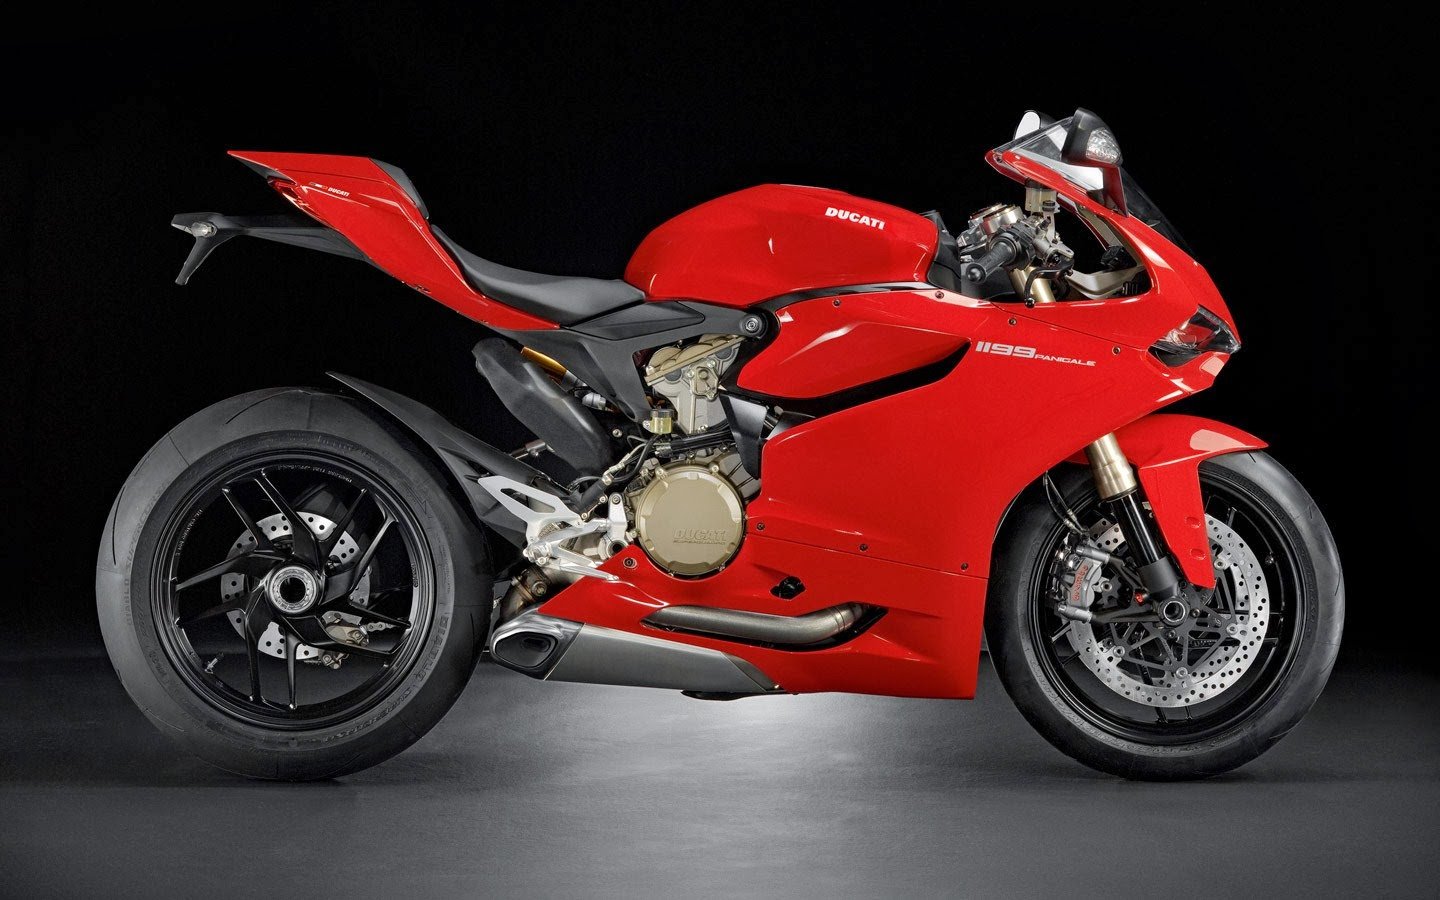  Desktop Background Get Ducati Panigale Wallpaper Photos for your